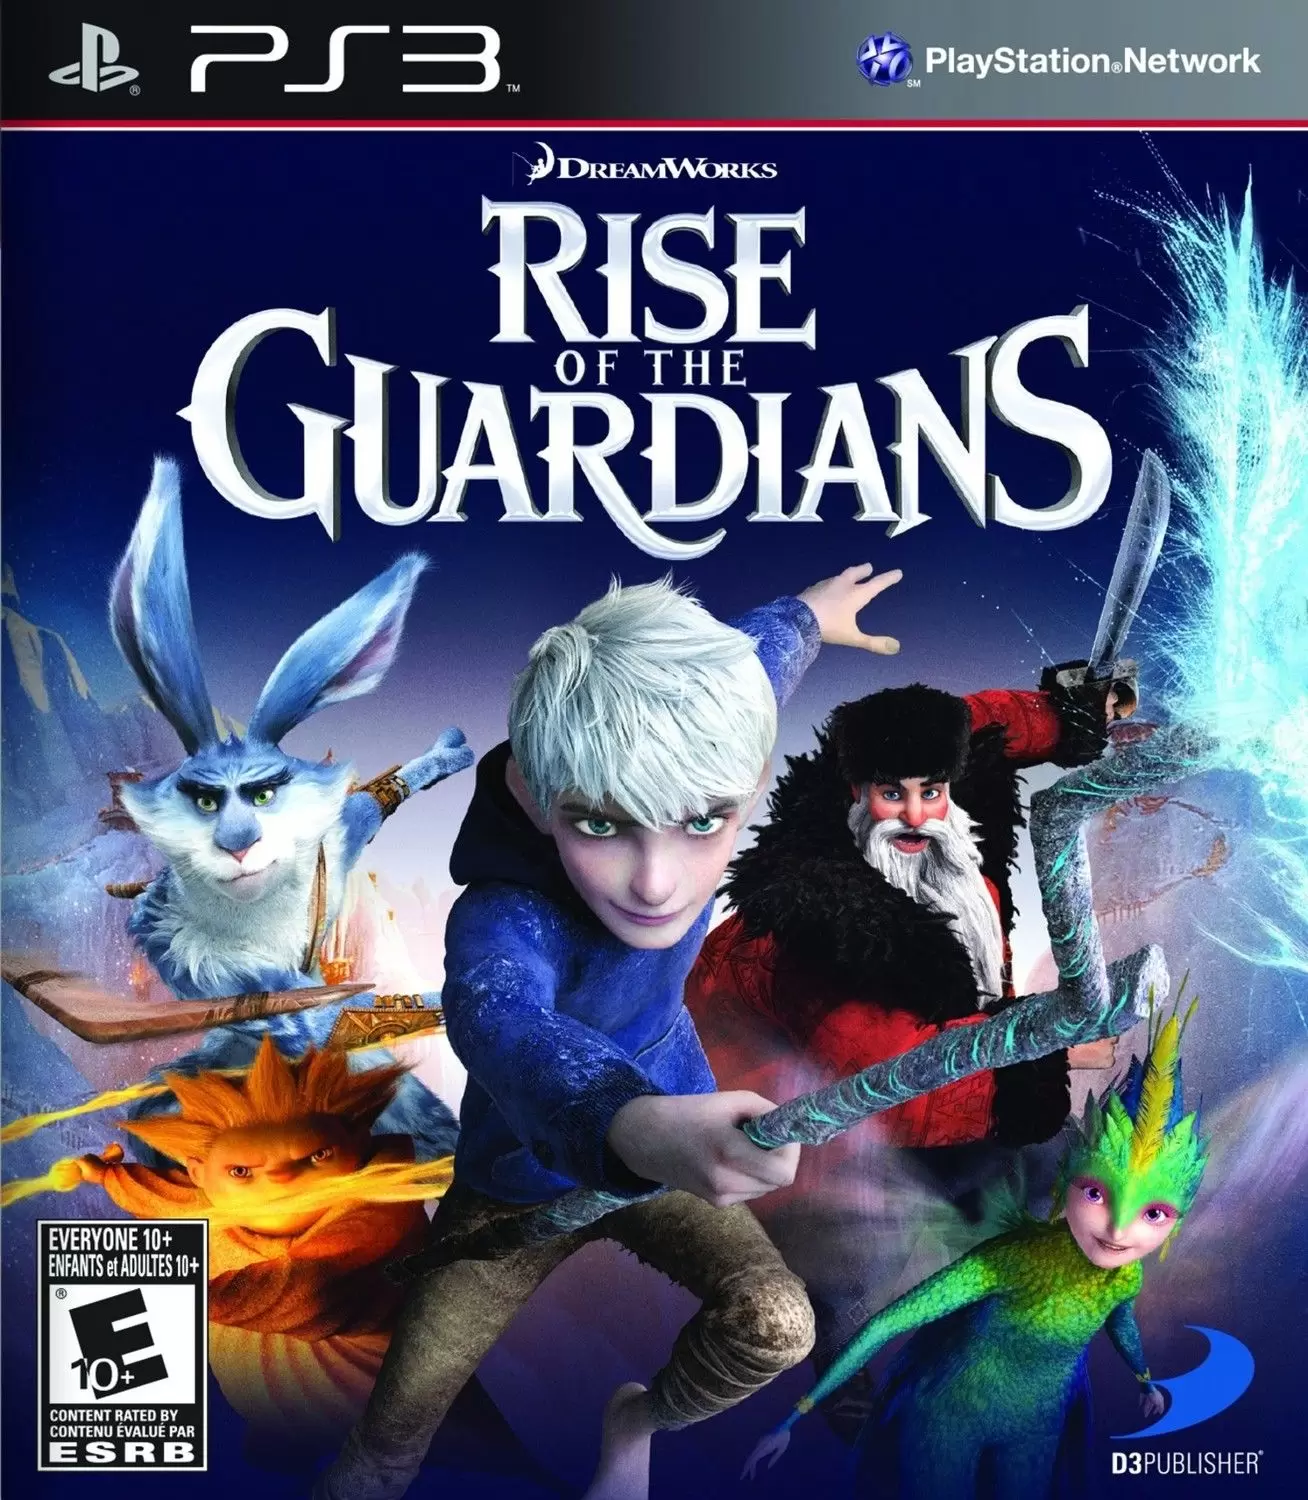 PS3 Games - Rise of the Guardians